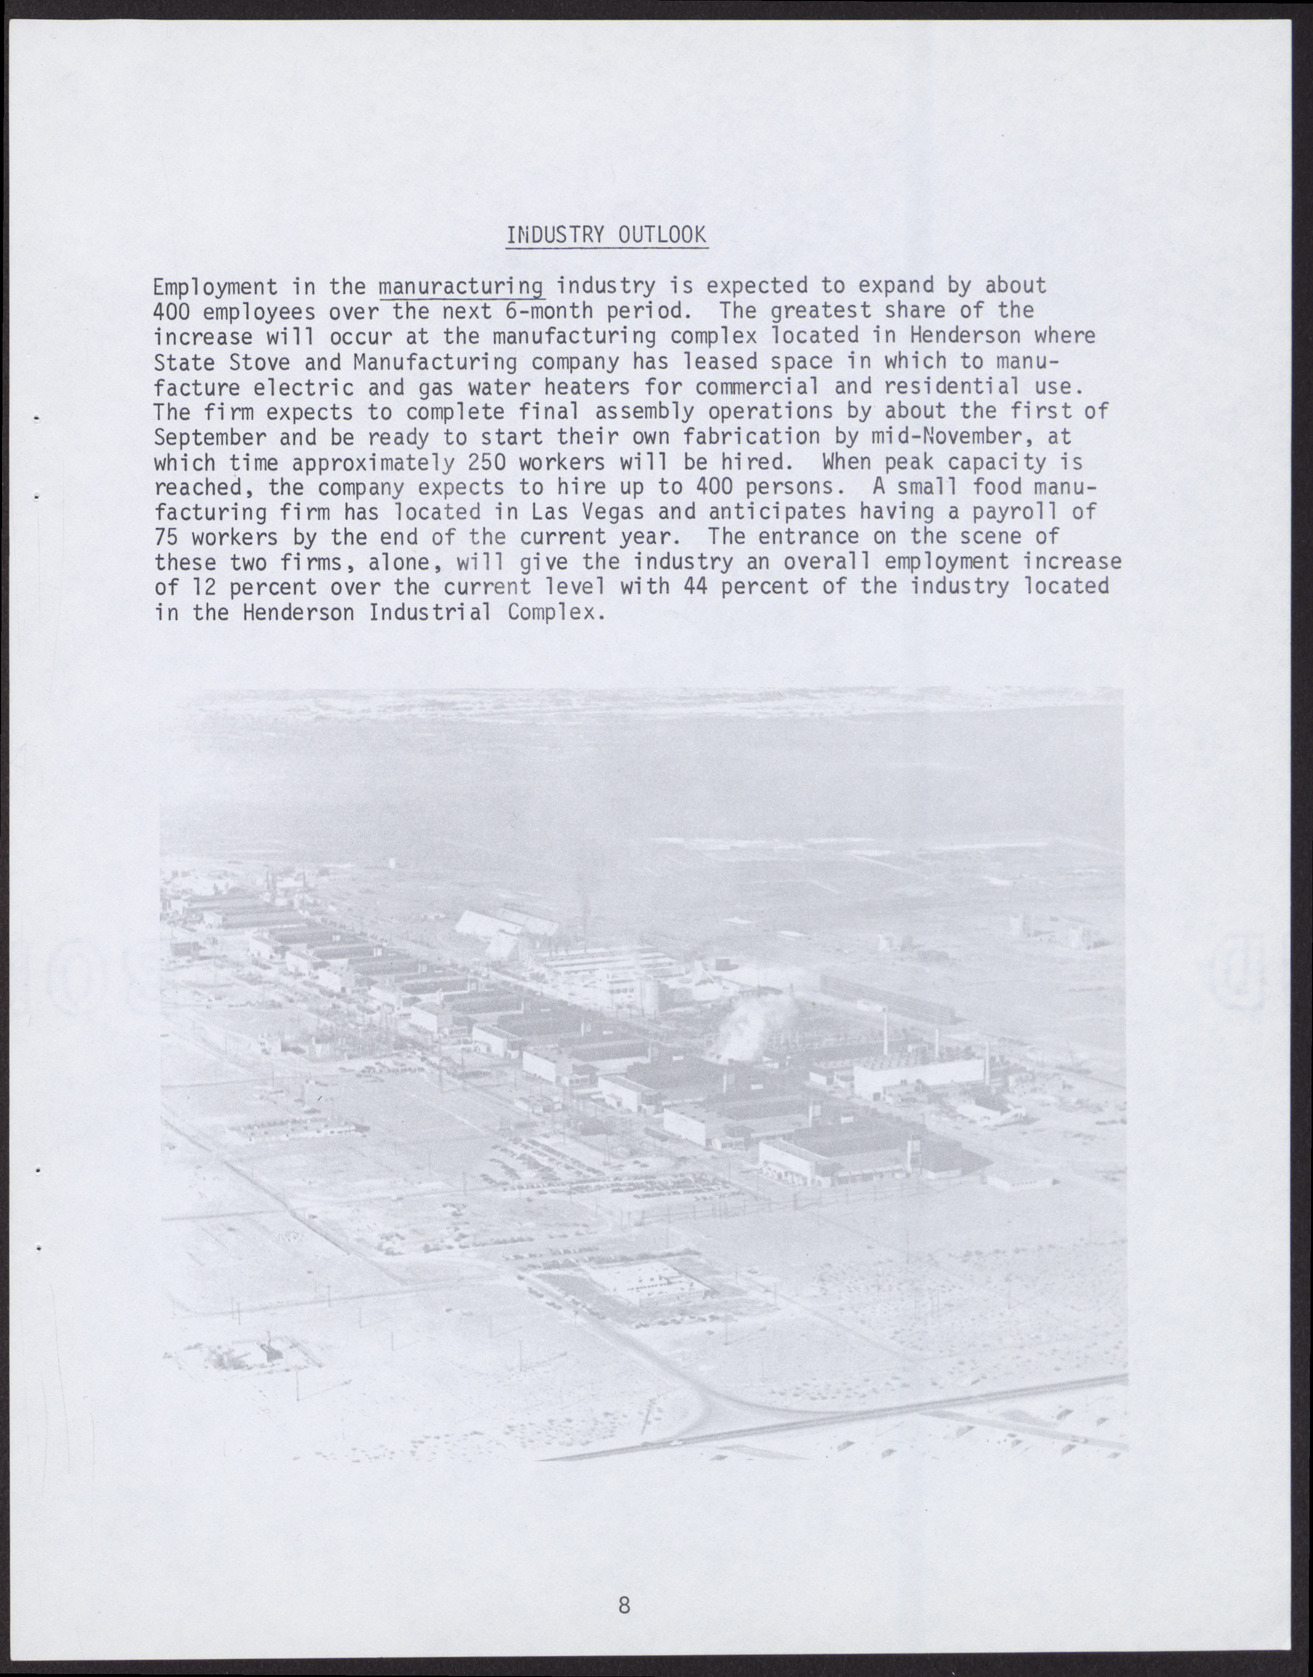 Semi-annual Area Manpower Review (16 pages), Fall 1969, page 11